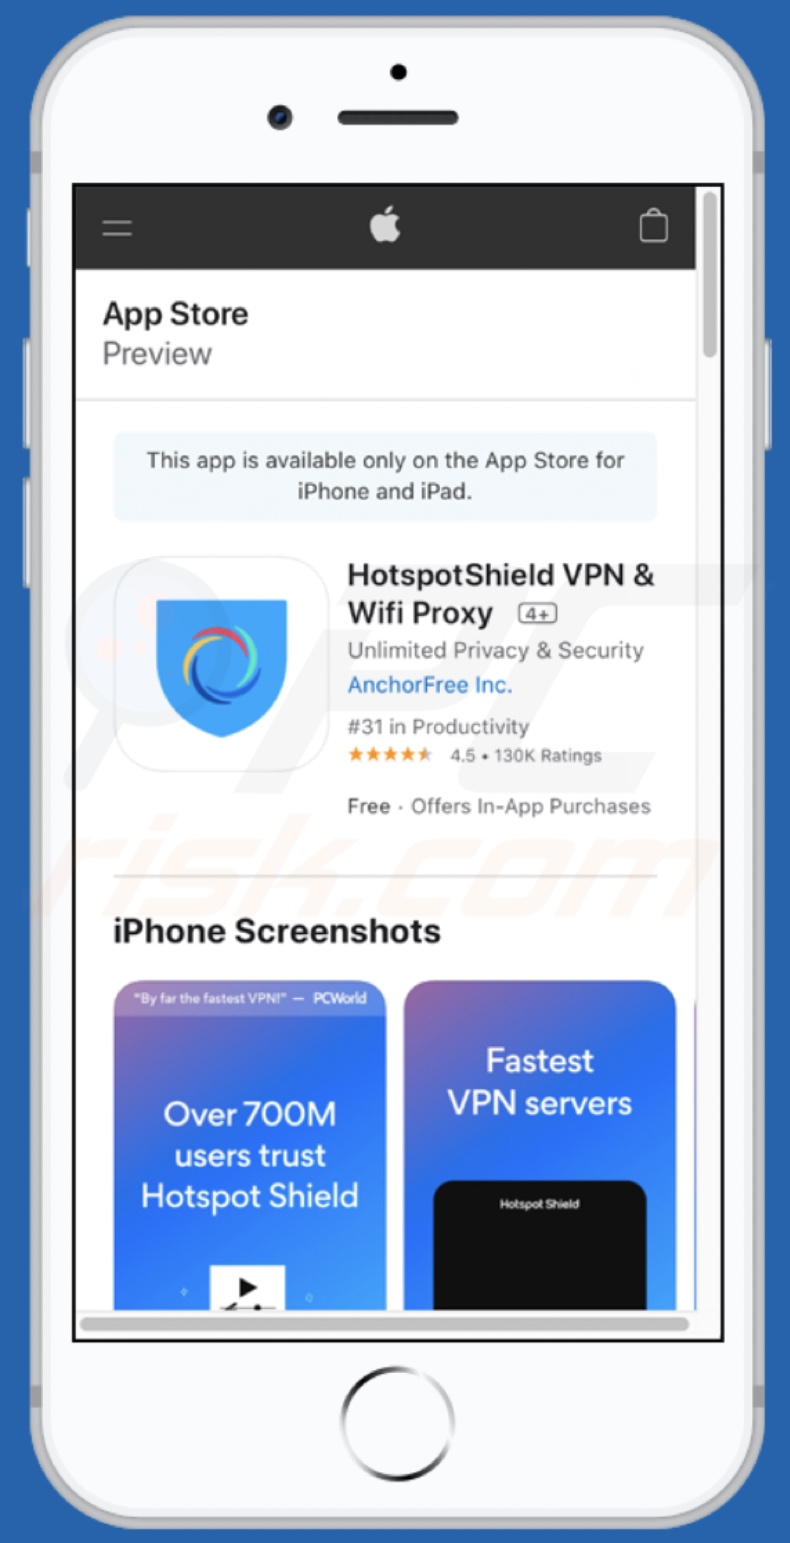 protect-connection[.]com scam variant promoted app